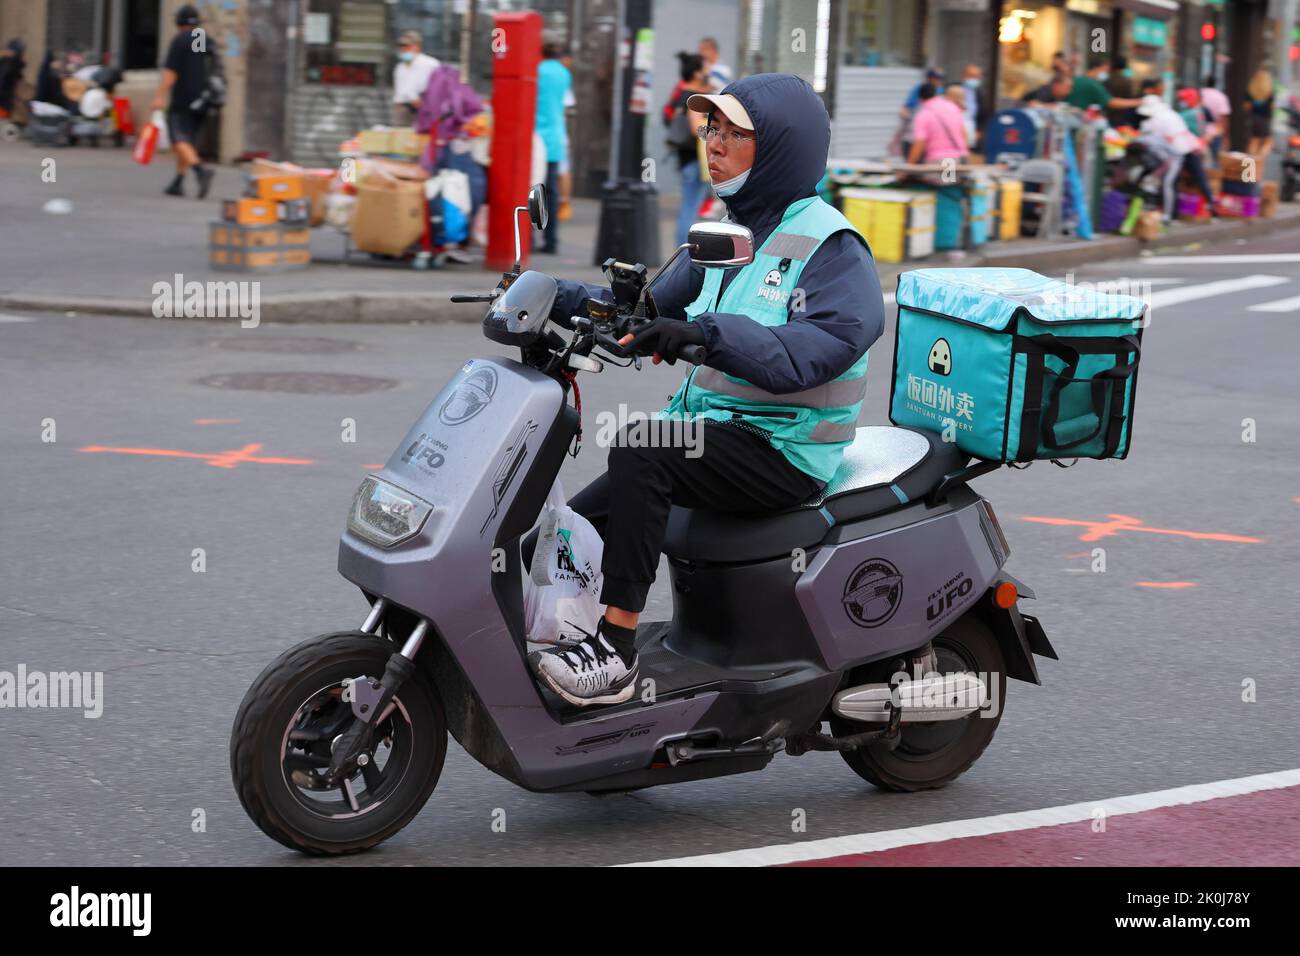 A Fantuan Delivery person on an electric moped in Downtown Flushing, New York. Fantuan 飯糰外賣Asian food delivery Stock Photo